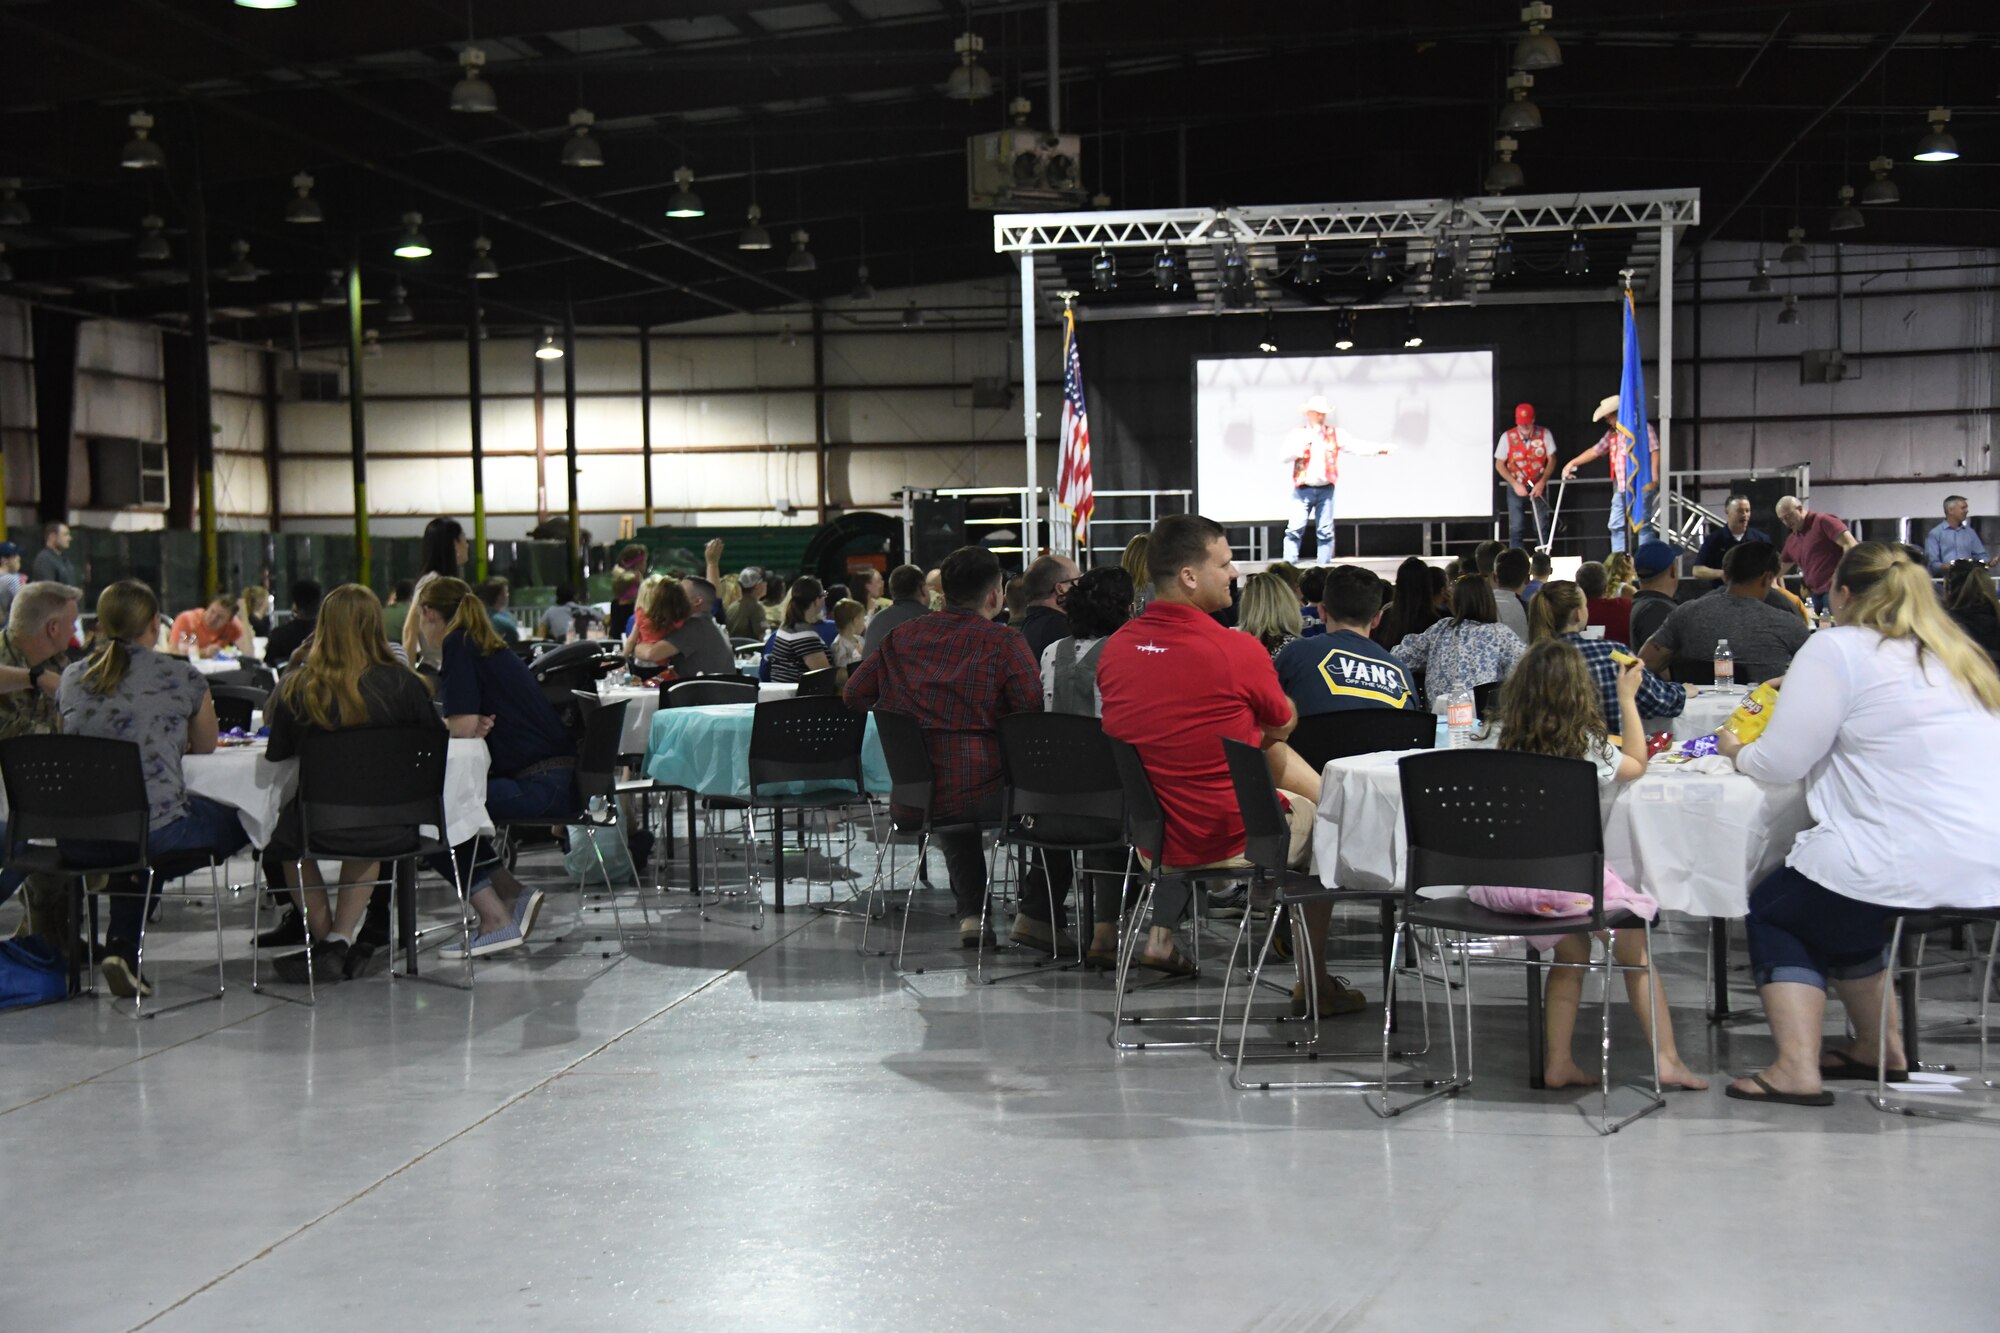 Attendees watch a presentation at the Committee of 100 dinner in Altus, Oklahoma, April 11, 2022. More than 50 people attended the dinner including Airmen, civic leaders and their families. (U.S. Air Force photo by Senior Airman Kayla Christenson)